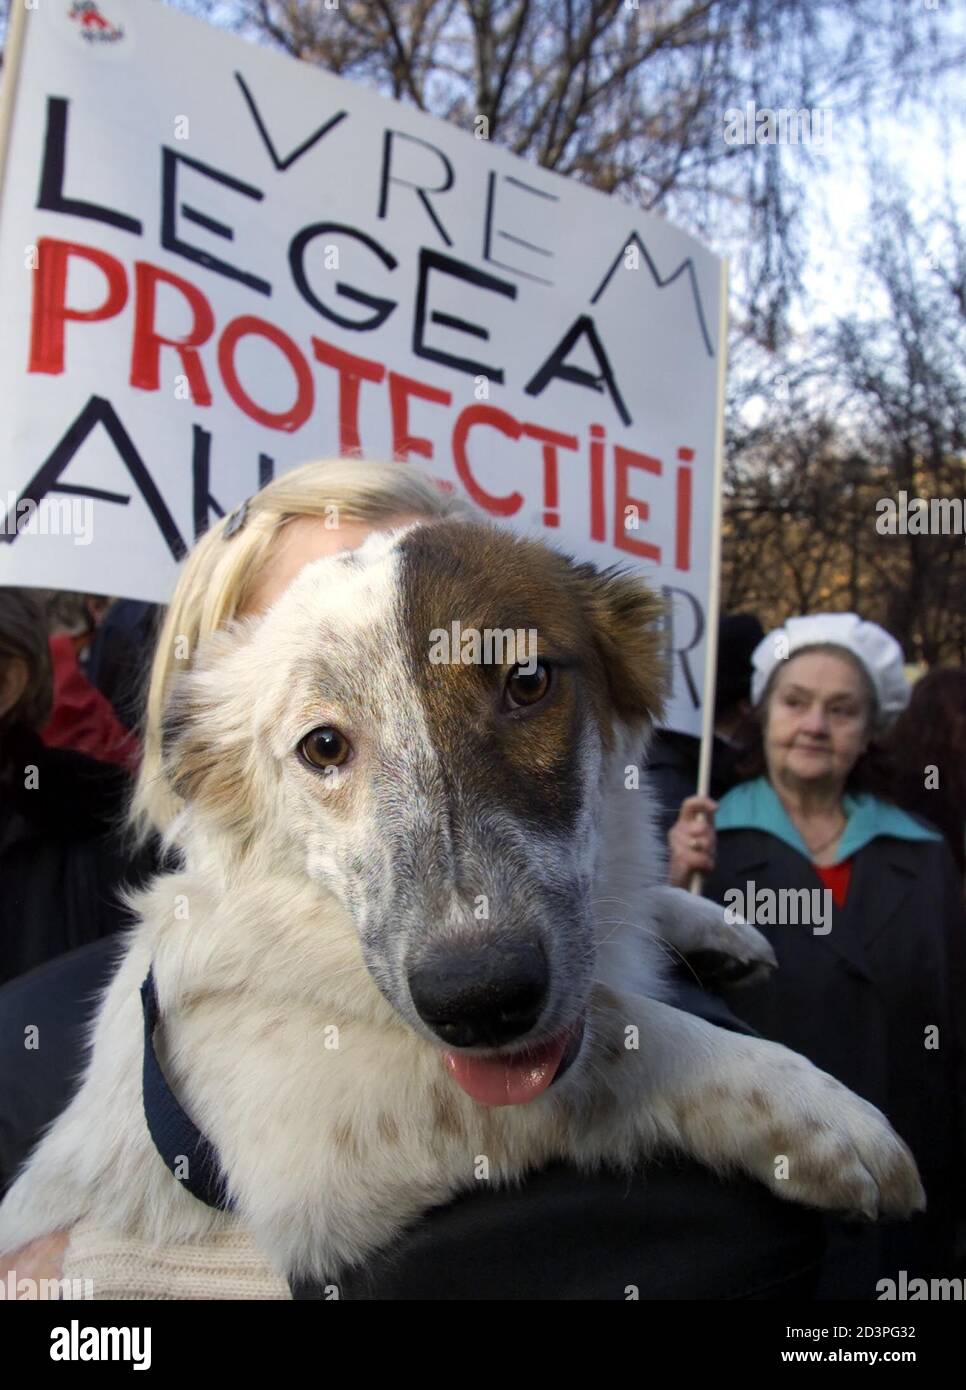 We want the animal protection law